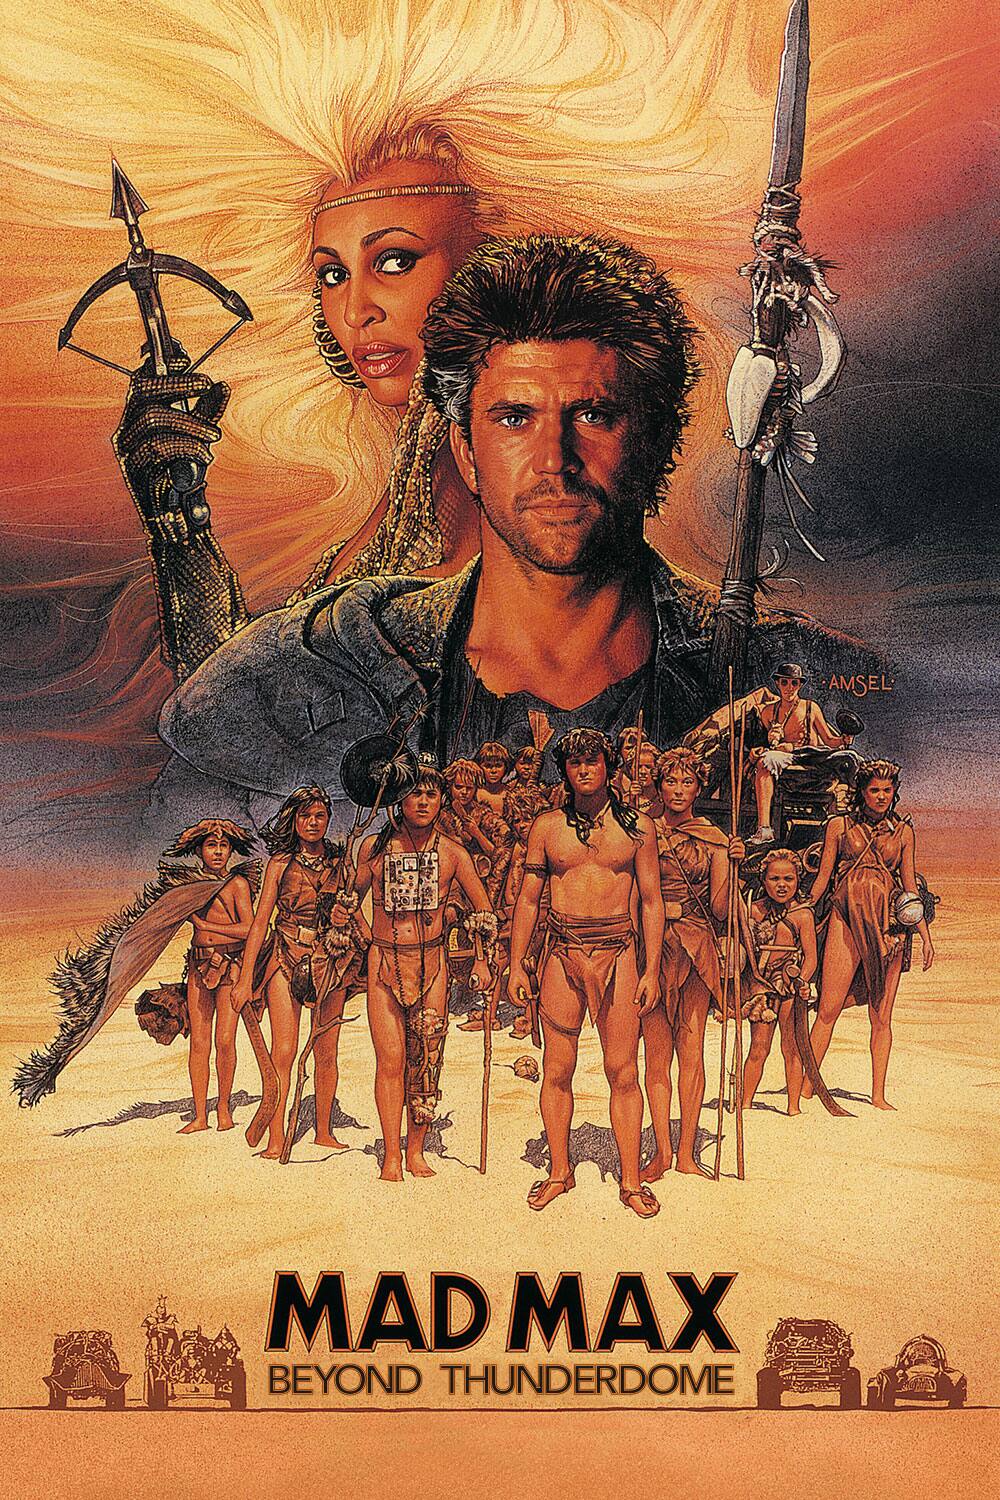 watch mad max beyond thunderdome online free